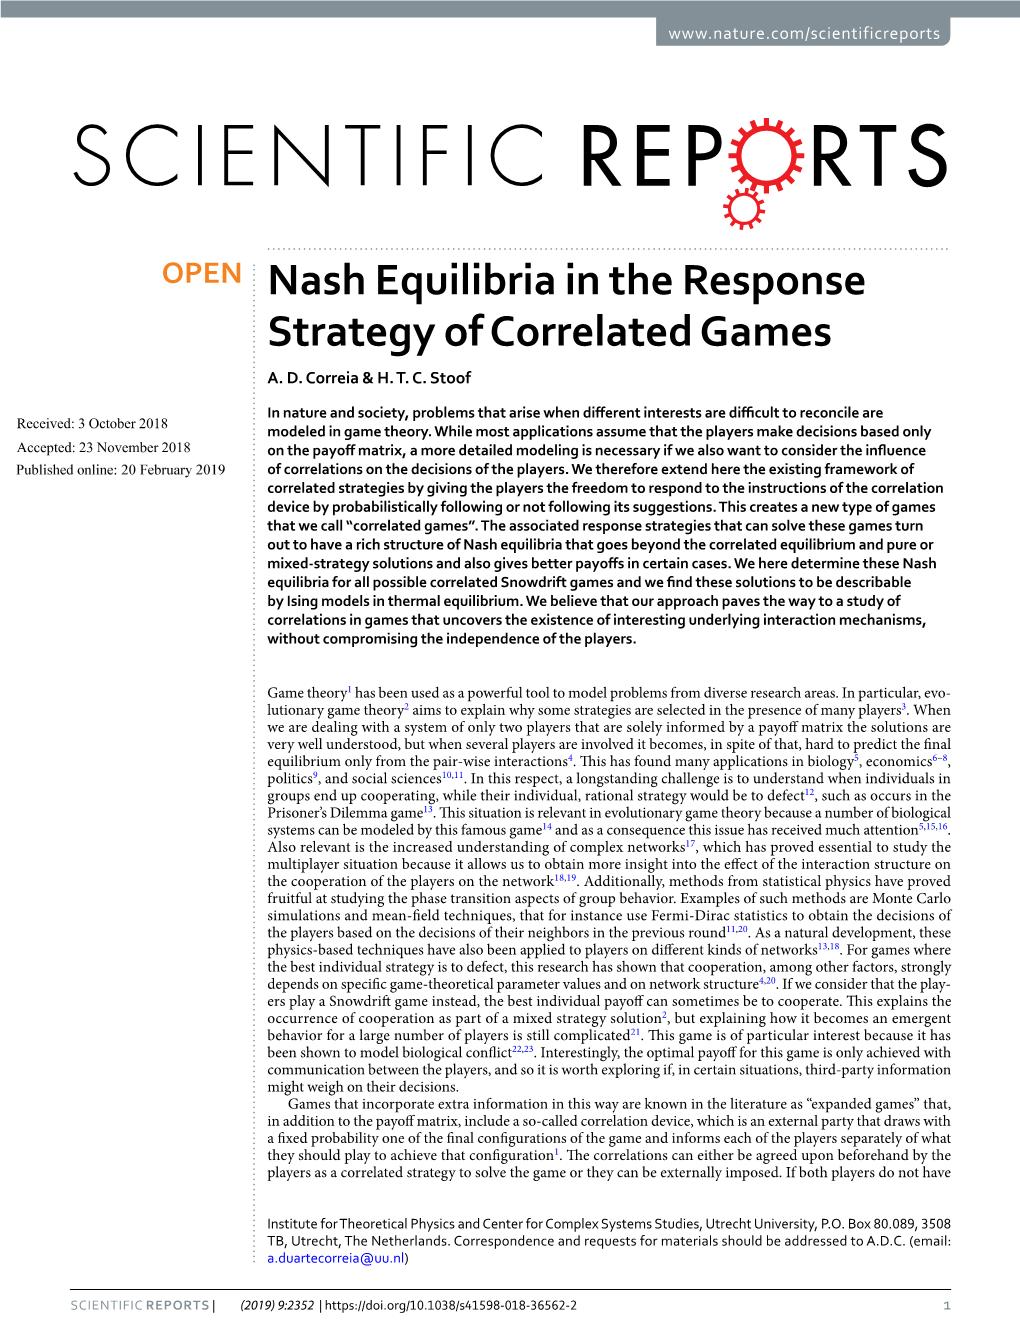 Nash Equilibria in the Response Strategy of Correlated Games A